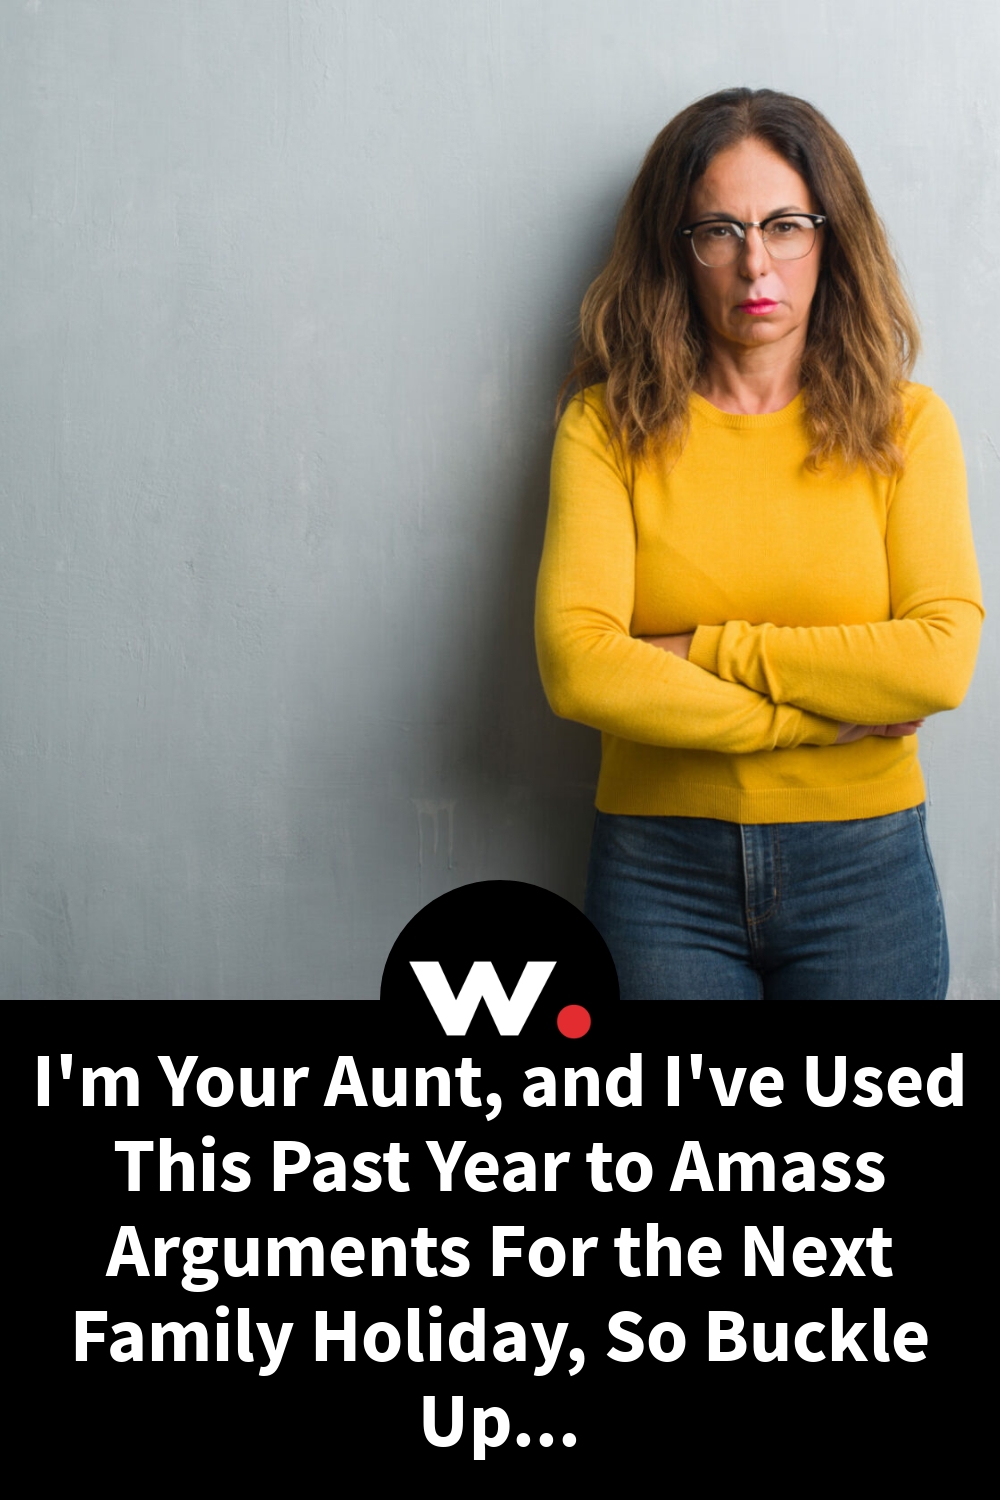 I’m Your Aunt, and I’ve Used This Past Year to Amass Arguments For the Next Family Holiday, So Buckle Up…